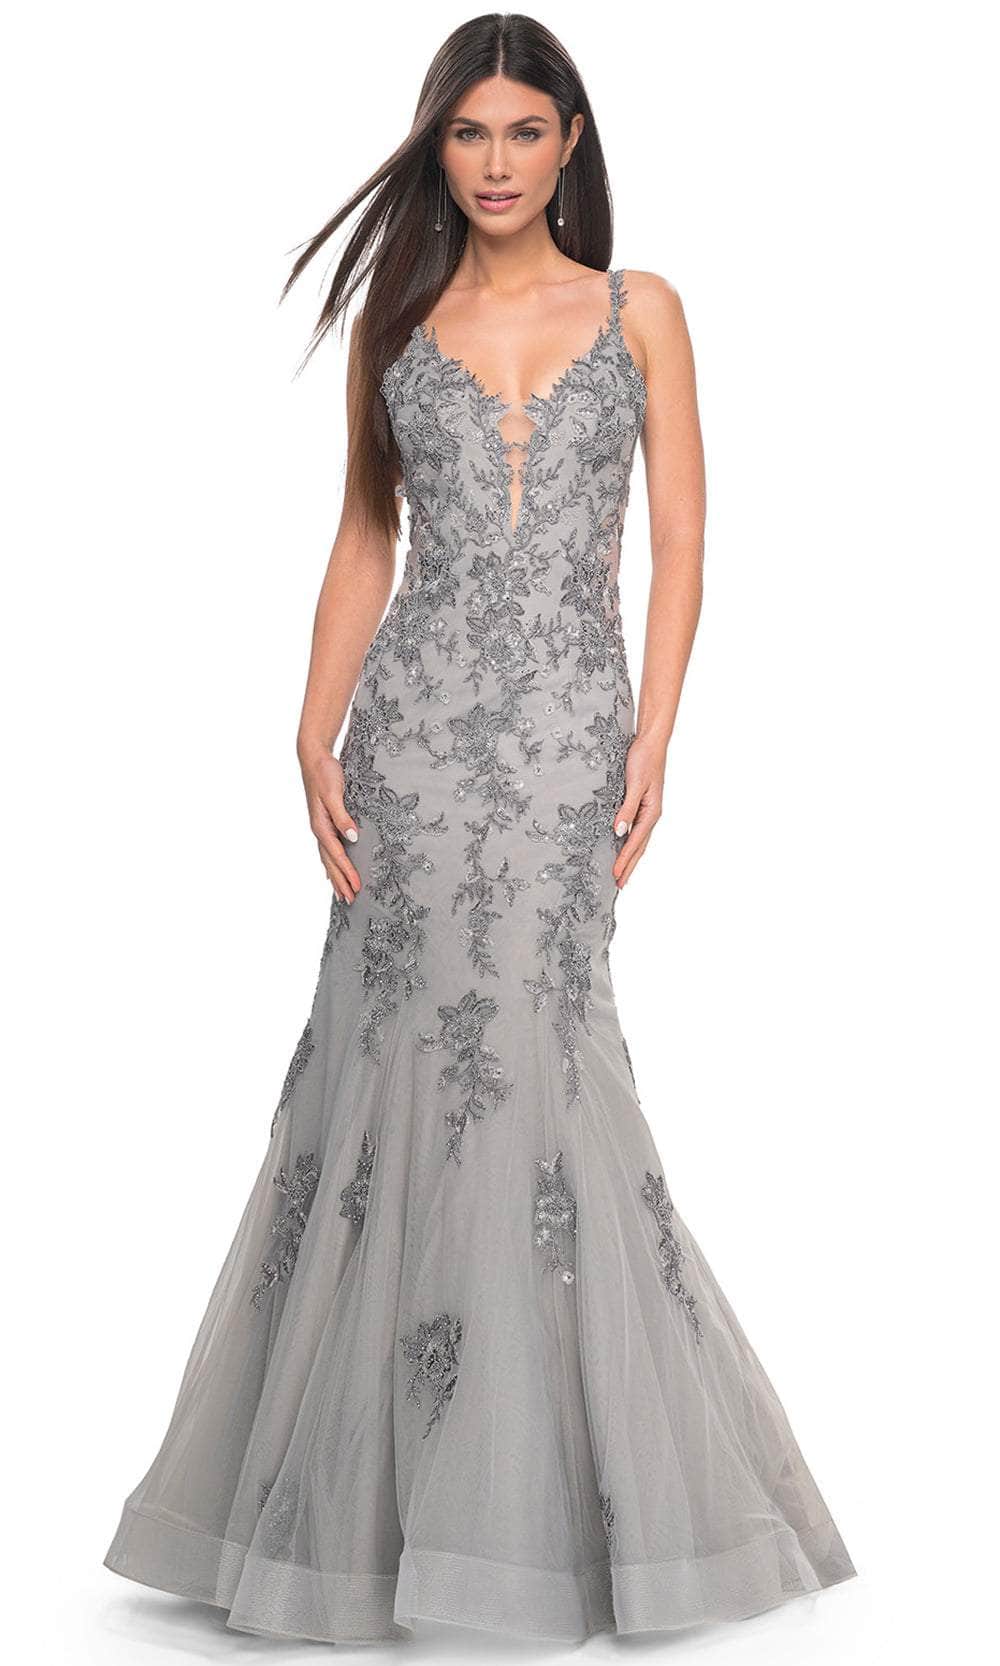 La Femme 32295 - Embroidered Sleeveless Mermaid Prom Gown
